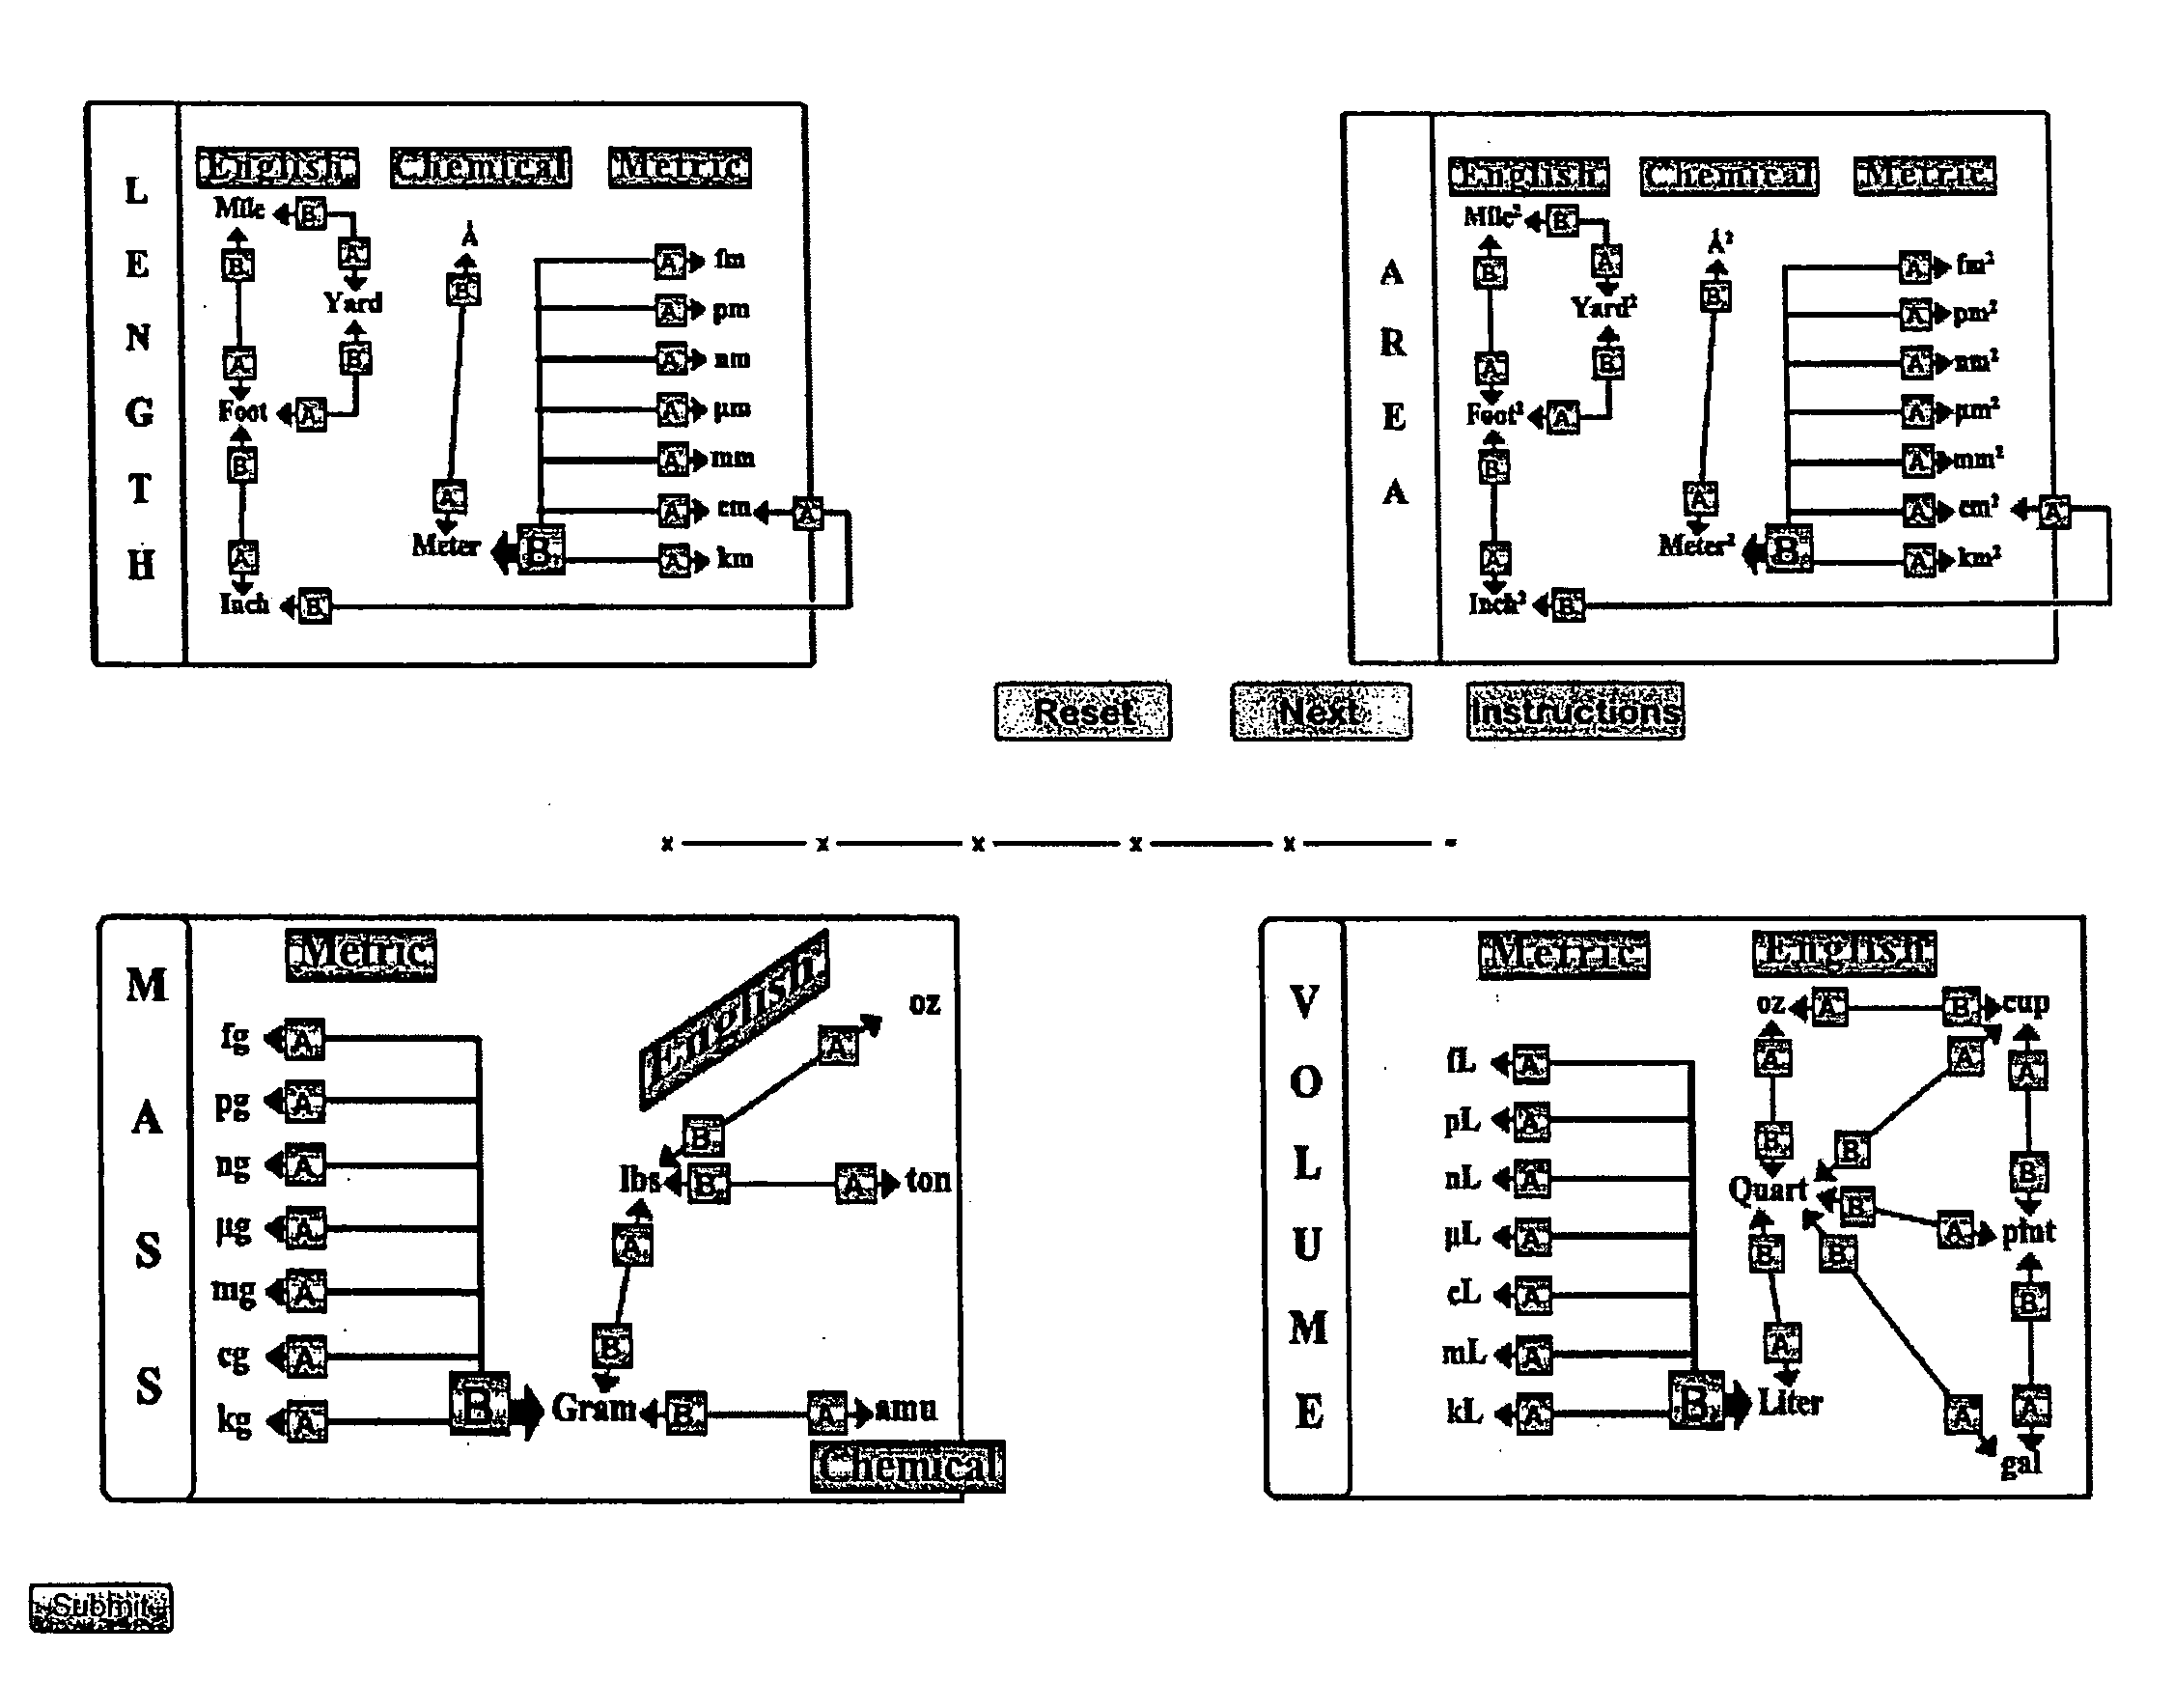 Interactive computer-assisted method of instruction and system for implementation